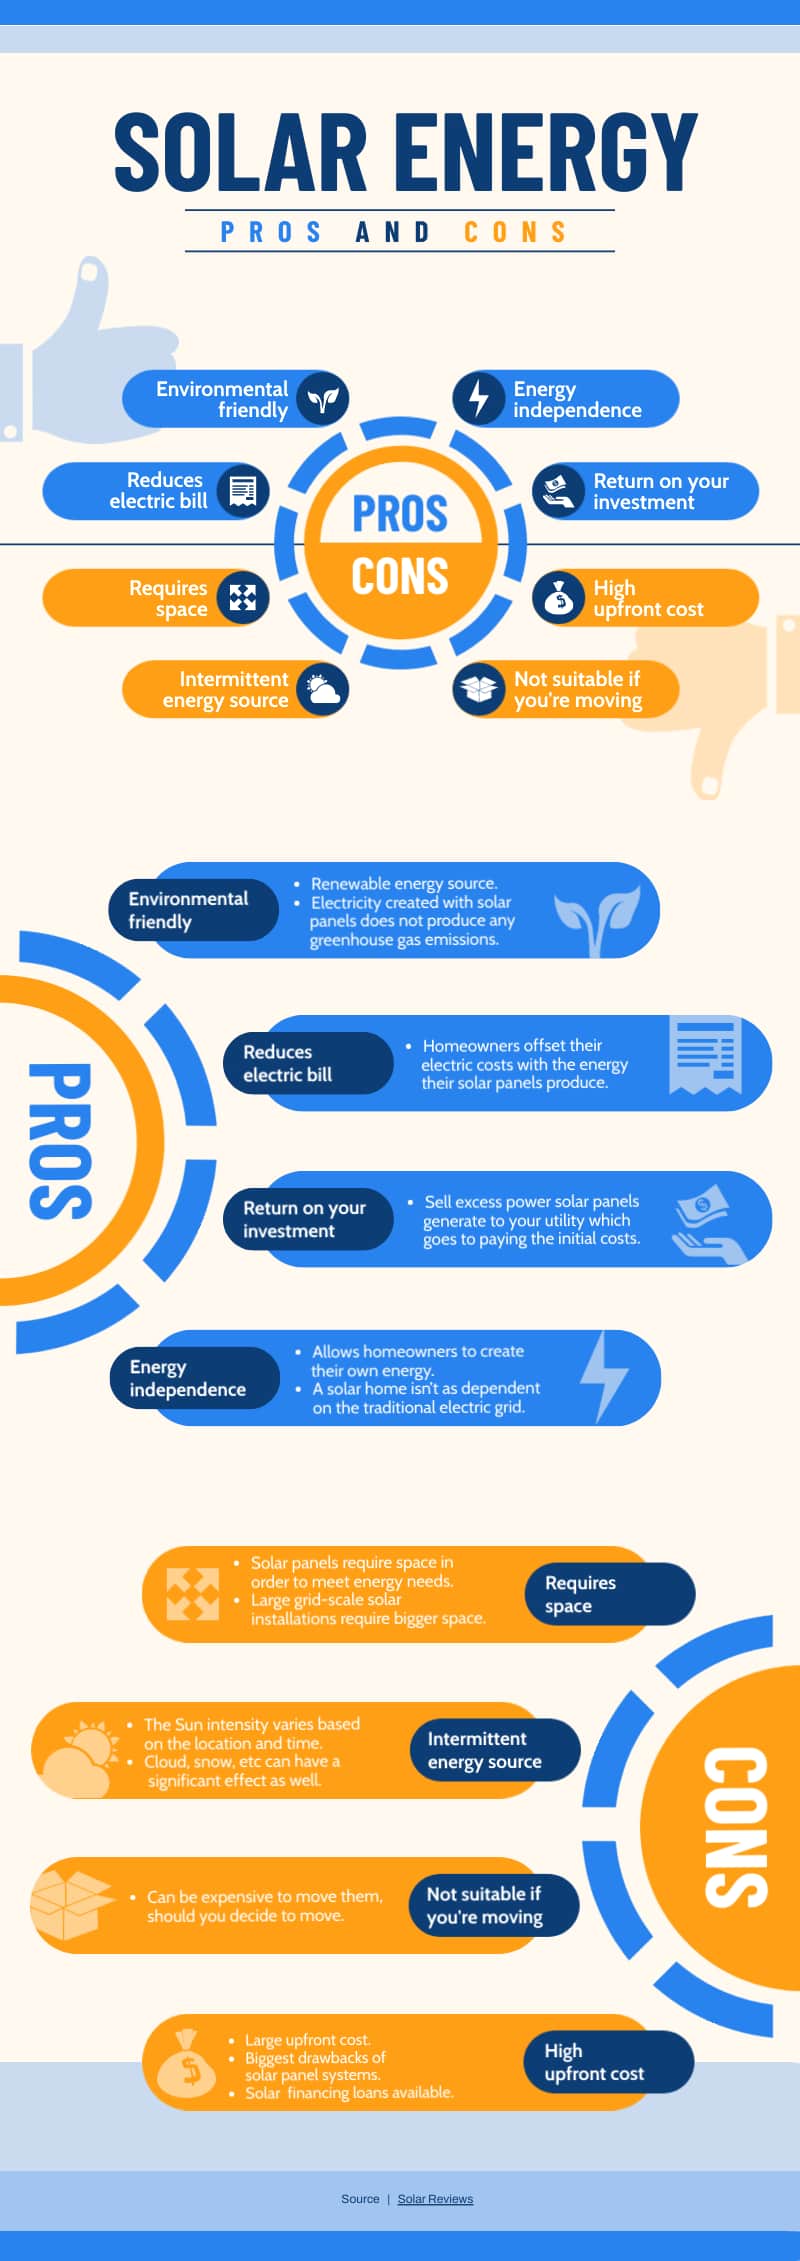 Solar energy pros and cons infographic